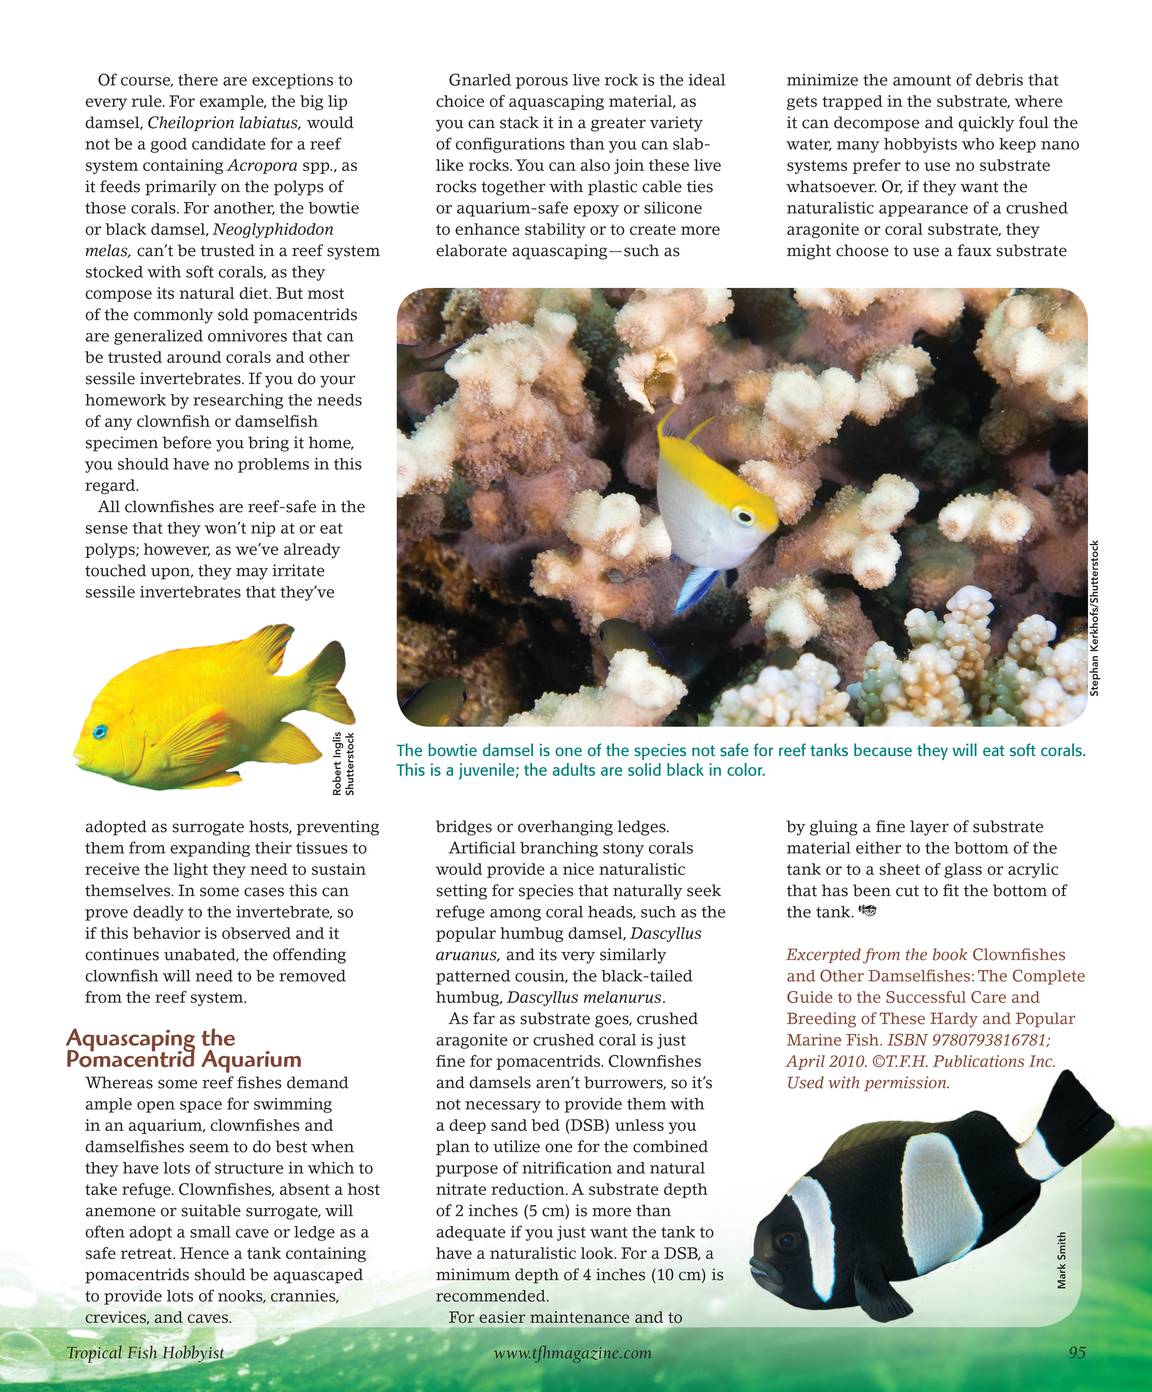 Tropical Fish Hobbyist - October 2010 - page 90